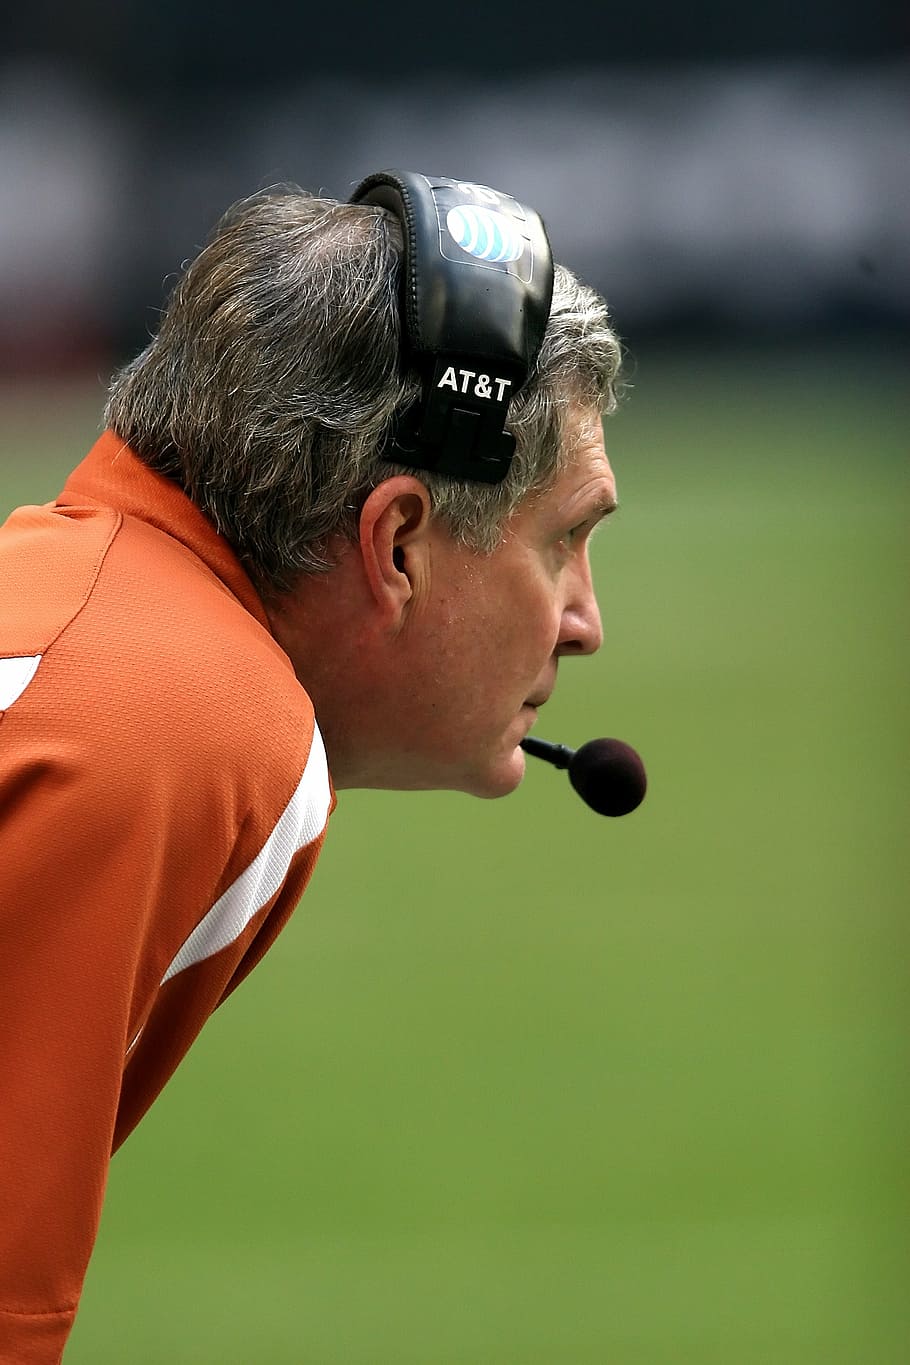 man in orange and white polo shirt wearing black and white AT&T headset